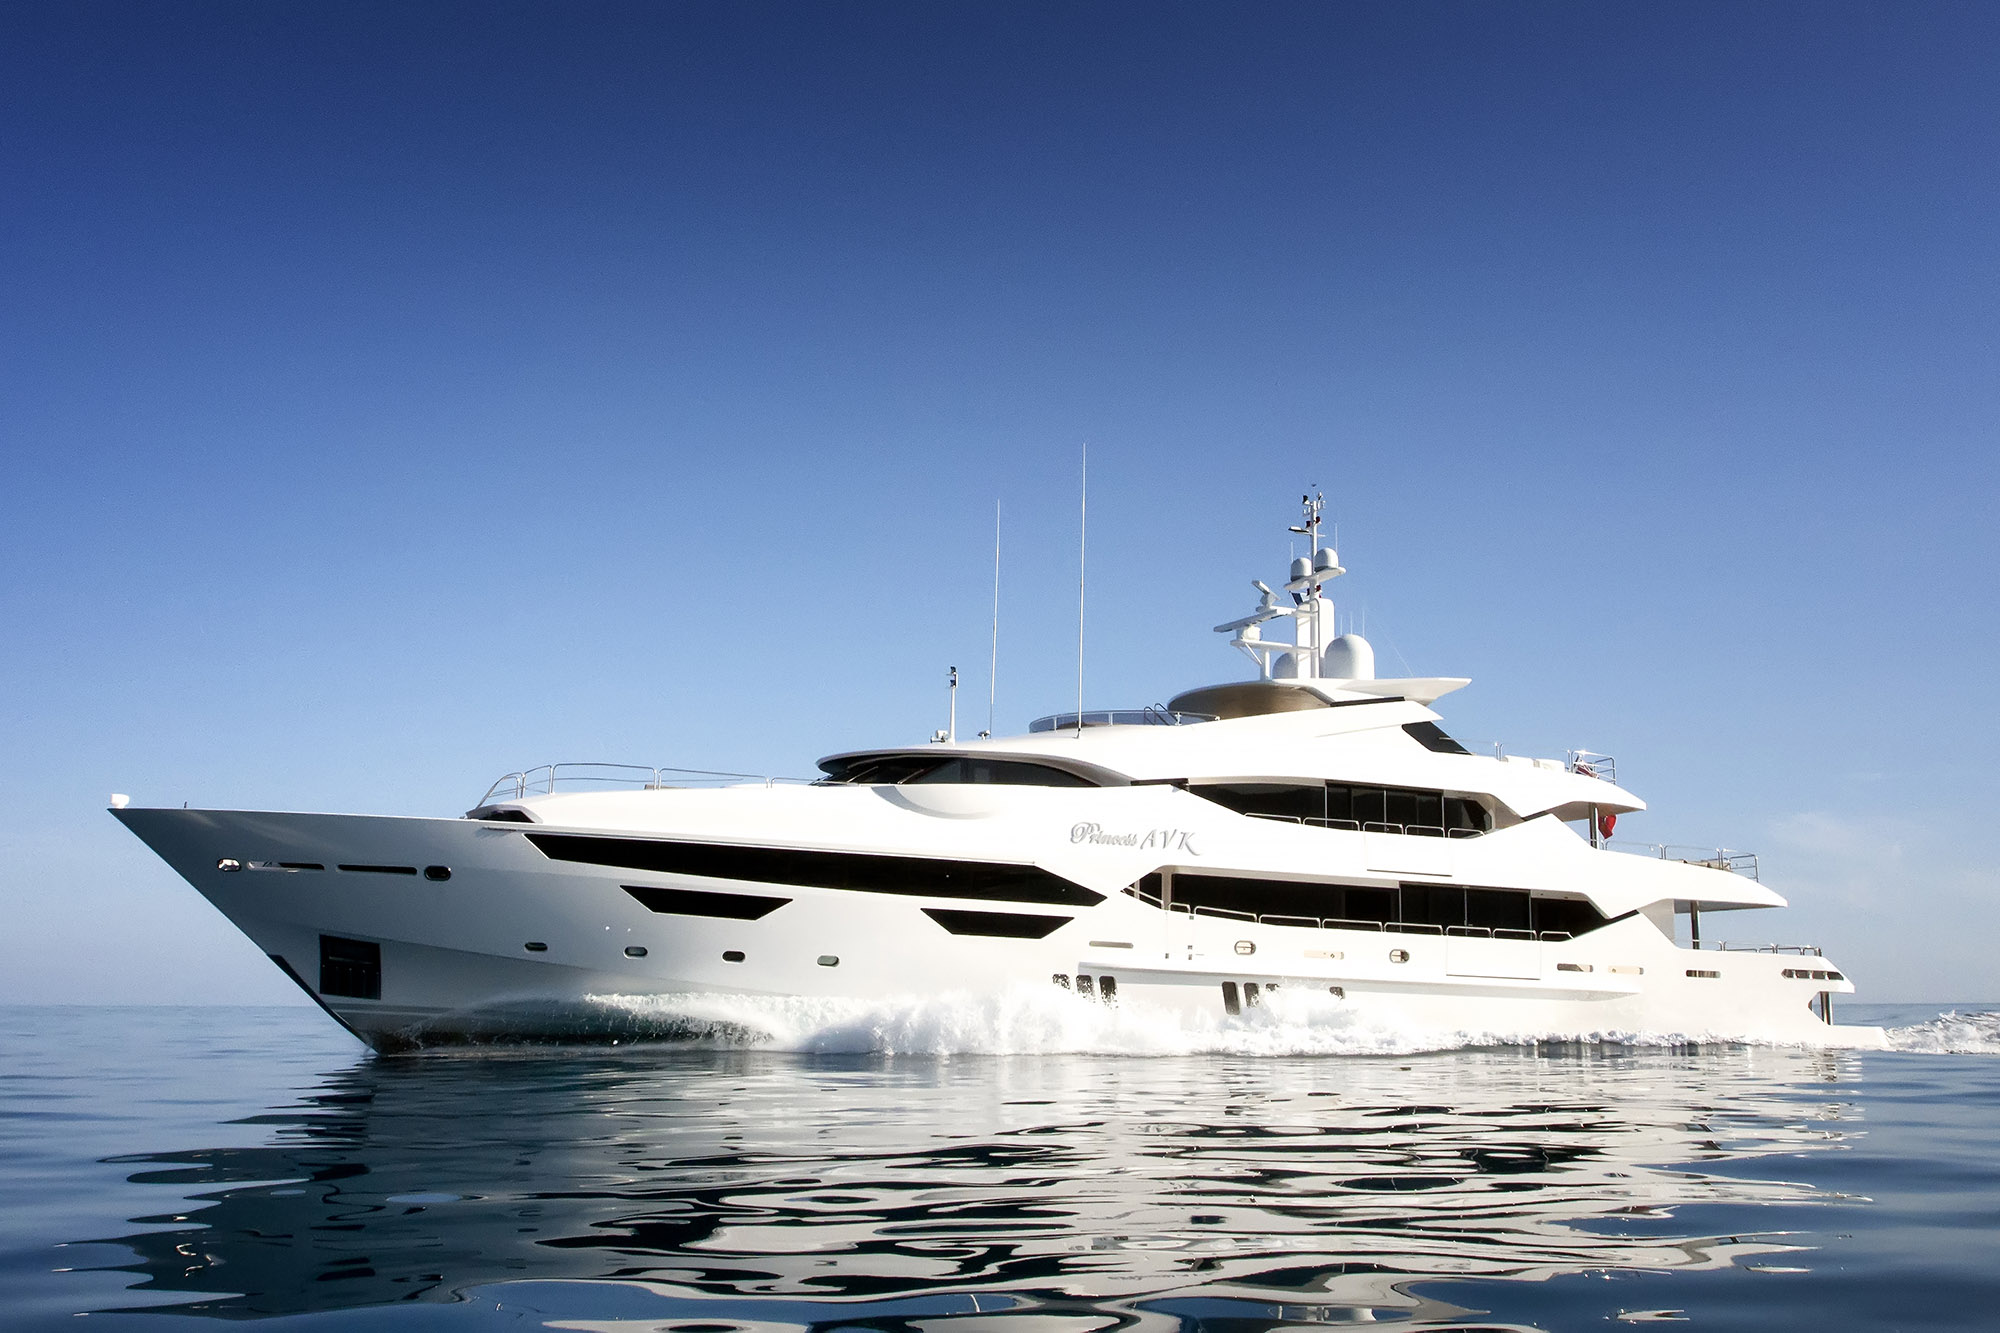 sunseeker superyachts for sale